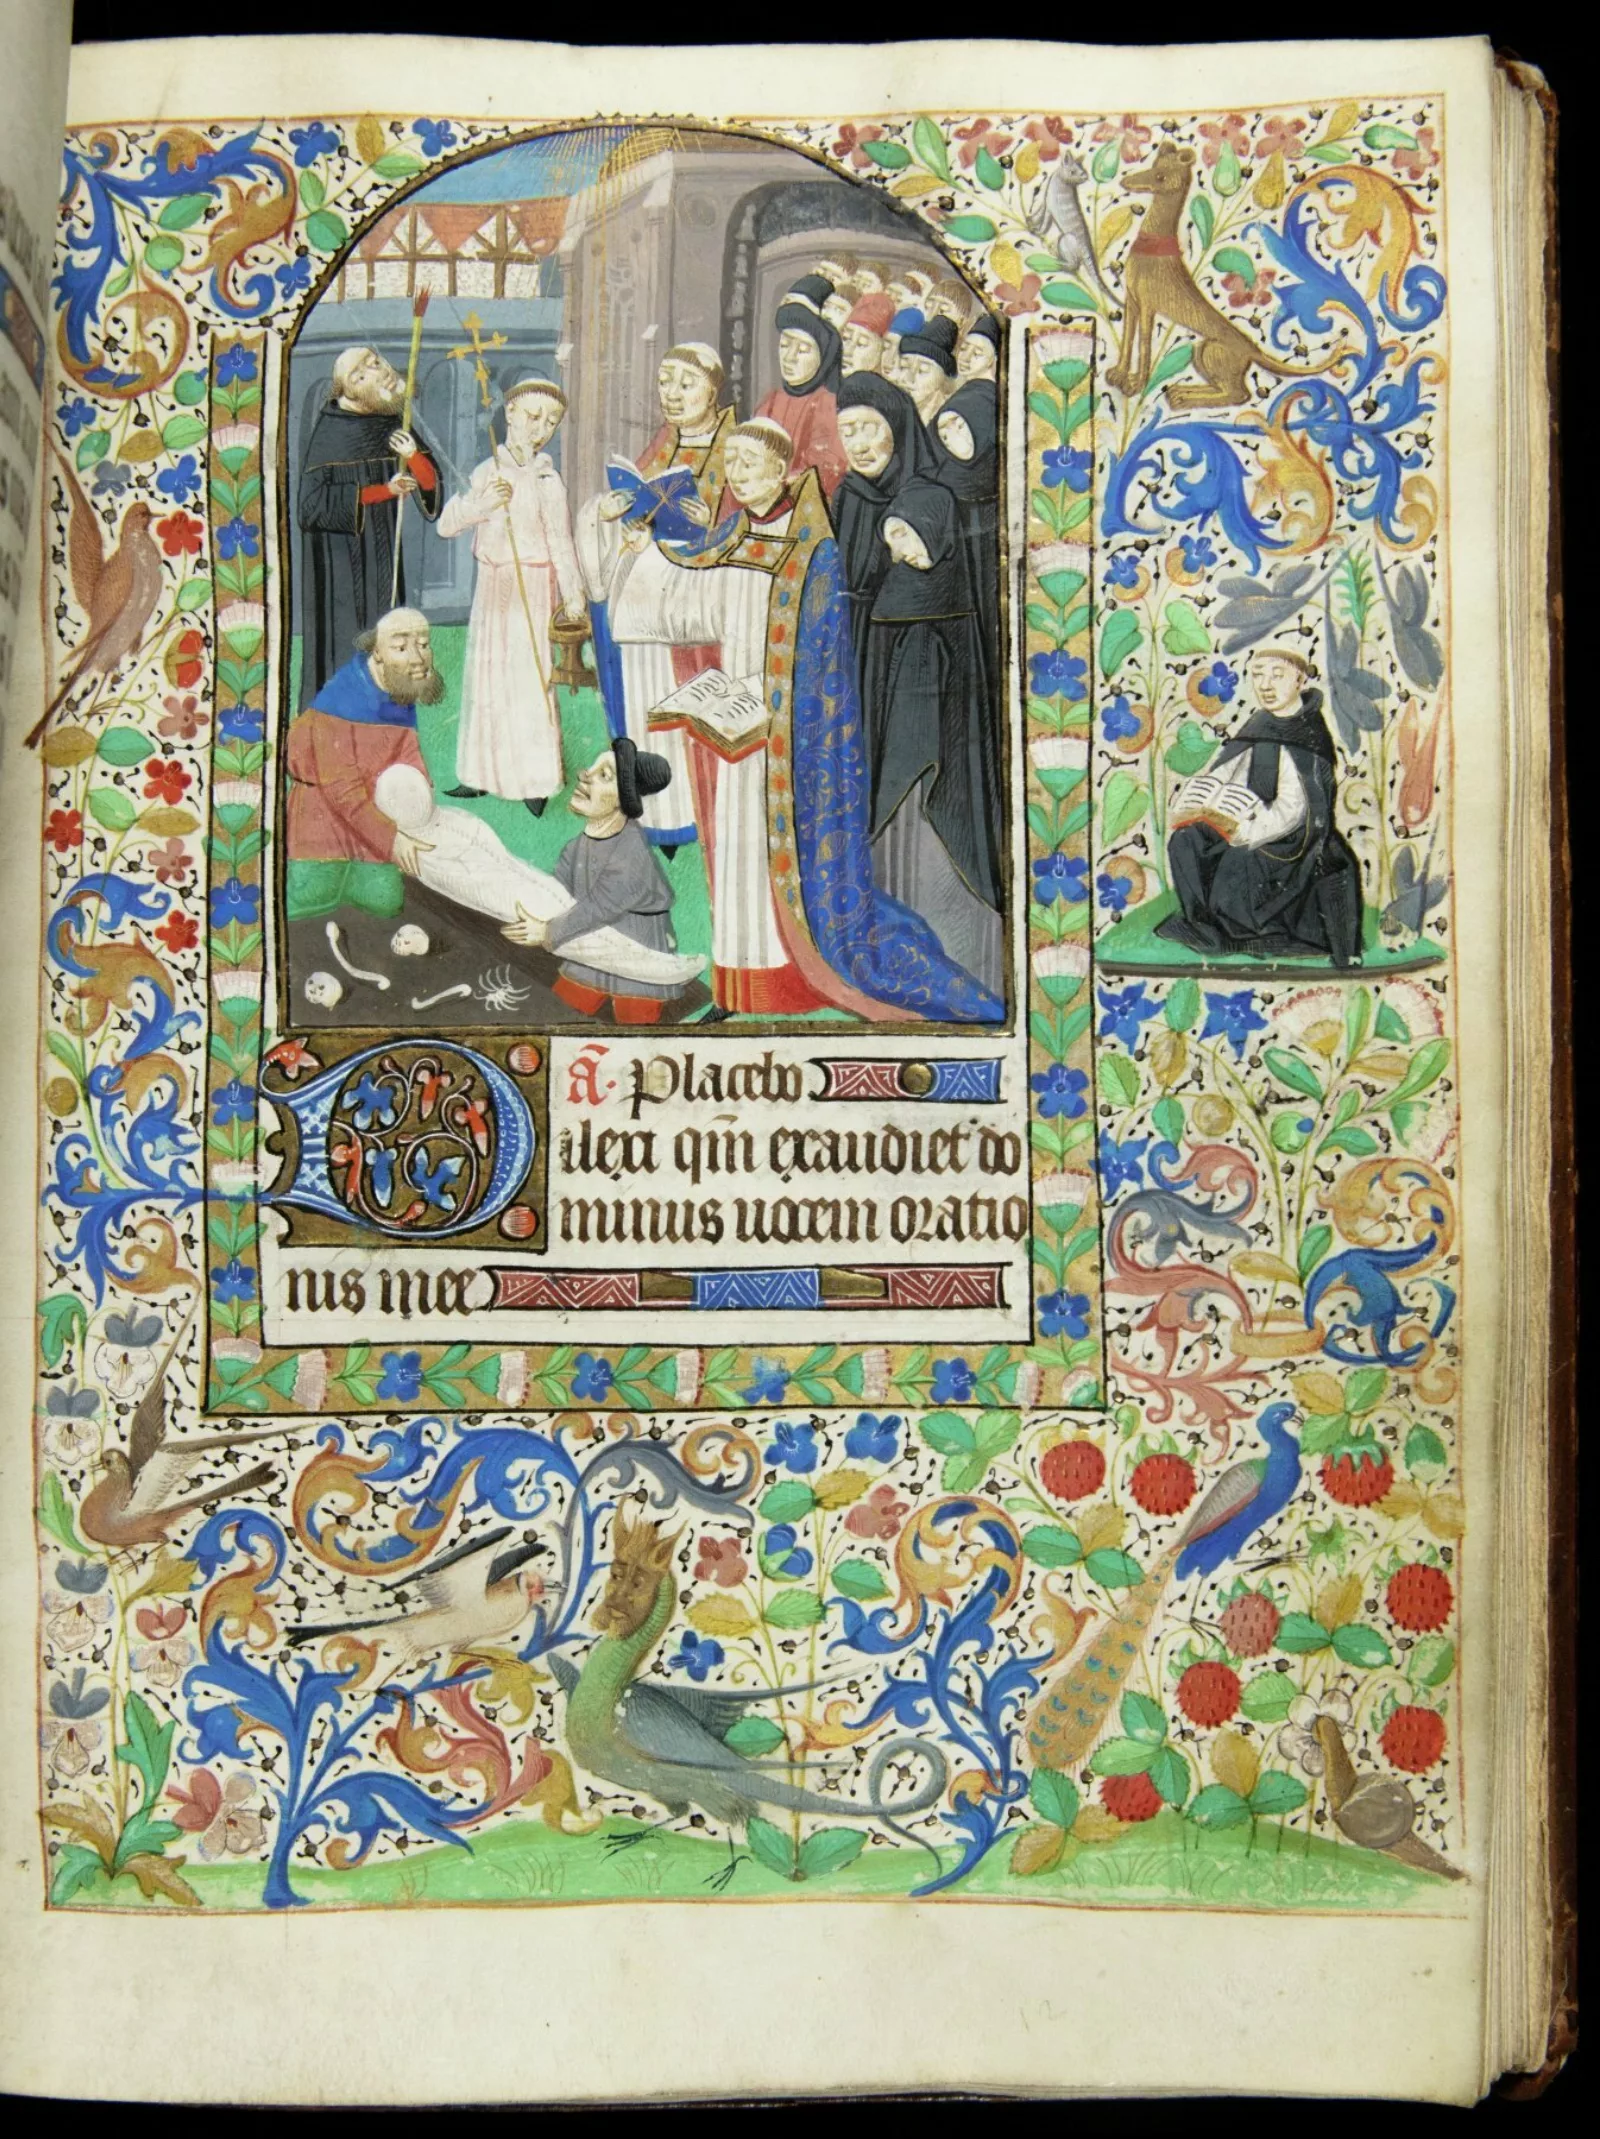 An illuminated page from a medieval prayer book features an illustration of a funeral. In the margins are elaborate decorative flourishes as well as fanciful hybrid creatures.